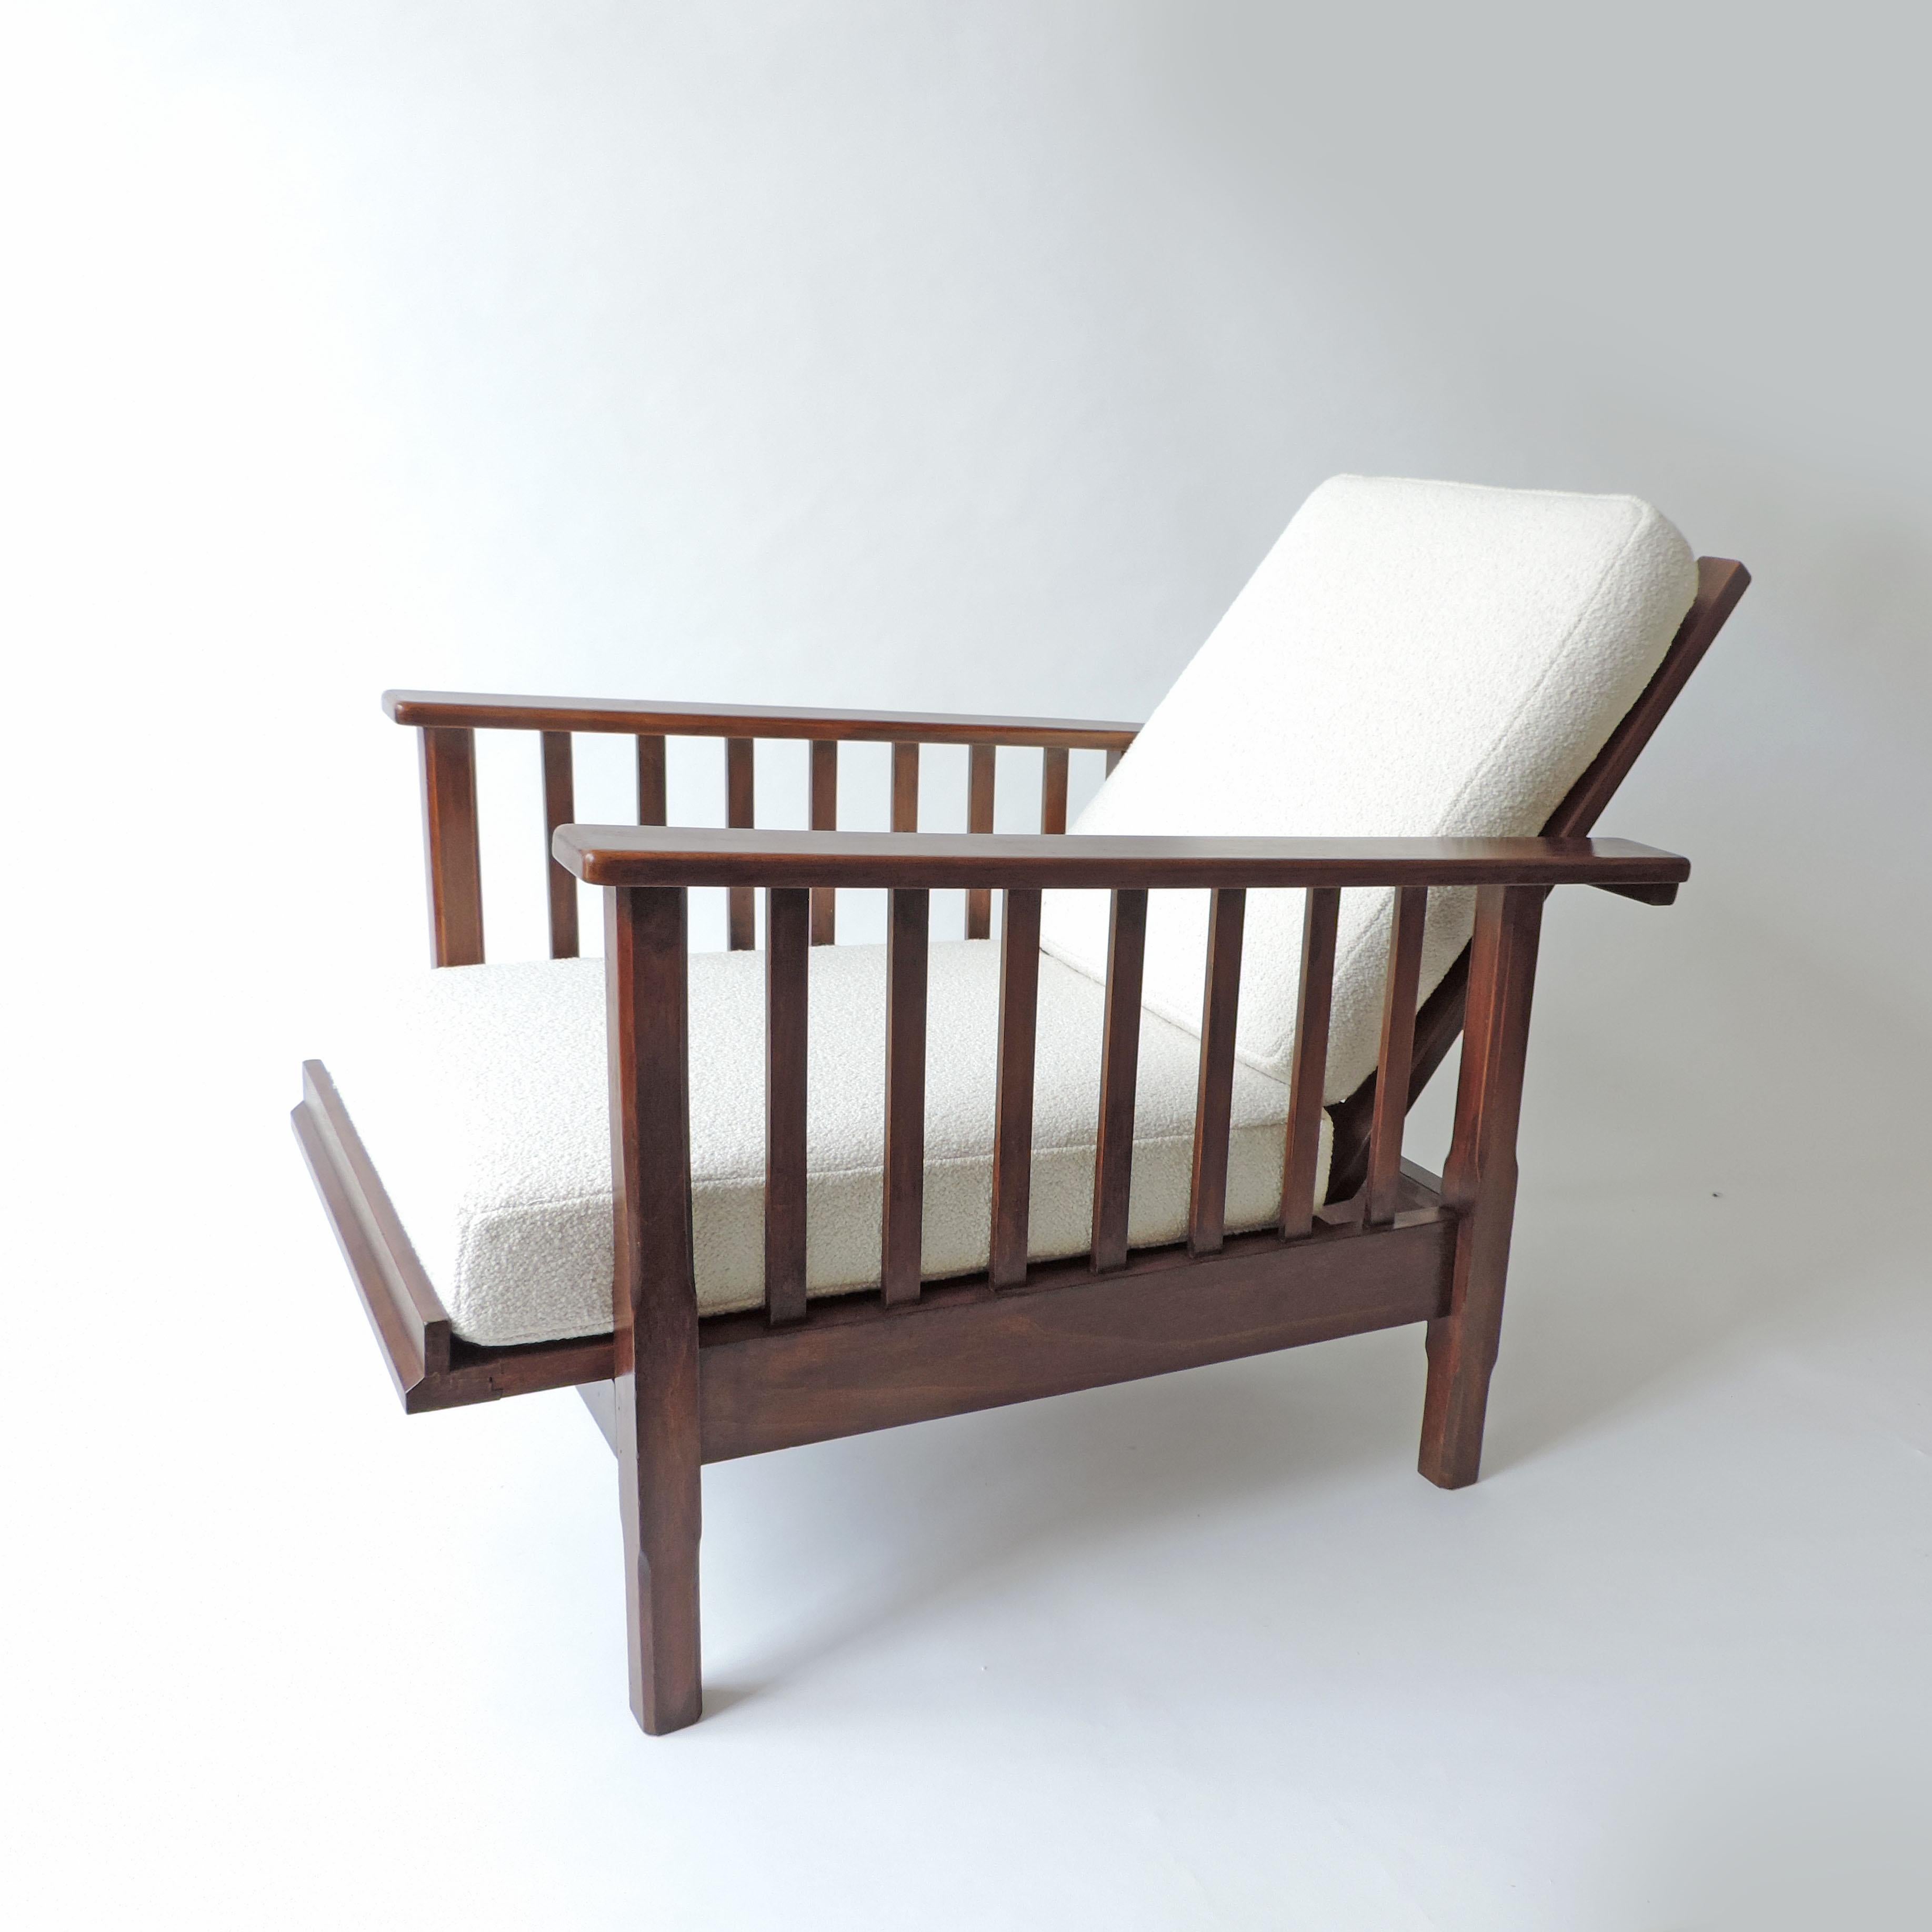 Italian Rationalist adjustable wooden lounge chair, Italy 1940s
Measurements when opened 125 x 66 x H 70 cm.